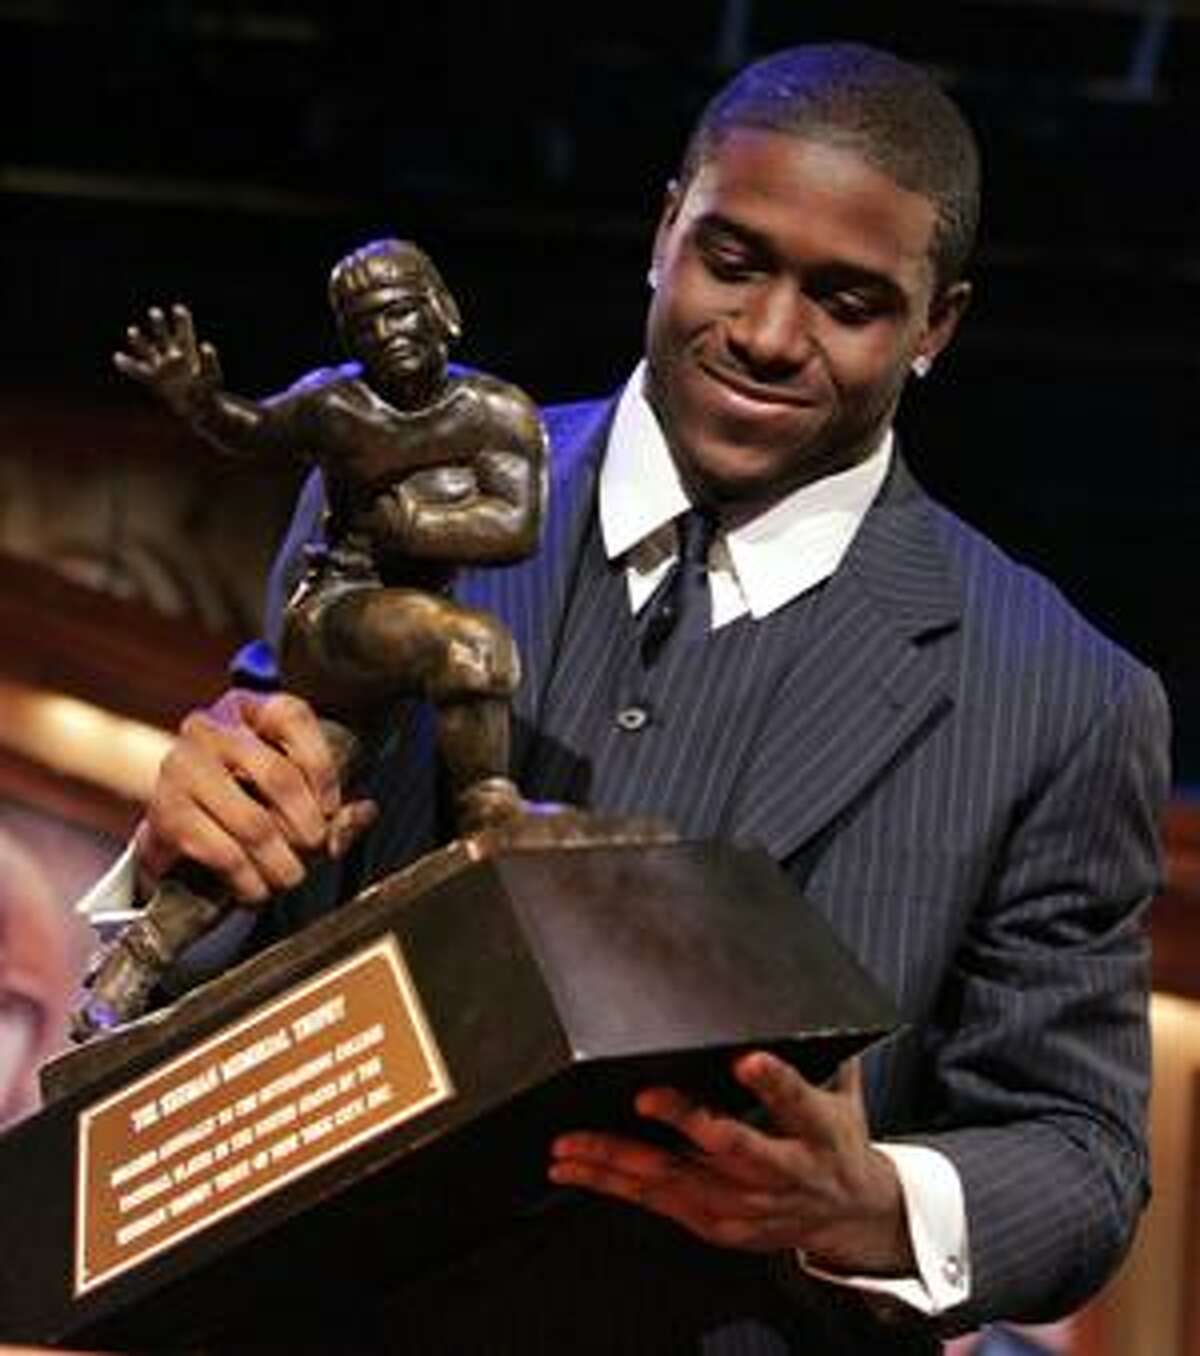 FILE - This Dec. 10, 2005, file photo shows Southern California tailback Reggie Bush pickimg up the Heisman Trophy after being announced as the winner of the award, in New York. Yahoo! Sports reported Tuesday, Sept. 7, 2010, that 2005 Heisman Trophy winner Reggie Bush is expected to be stripped of the award by the end of the month. The former Southern Cal running back would become the first player in the 75-year history of the award to have the Heisman Trophy taken away. (AP Photo/Julie Jacobson, File)